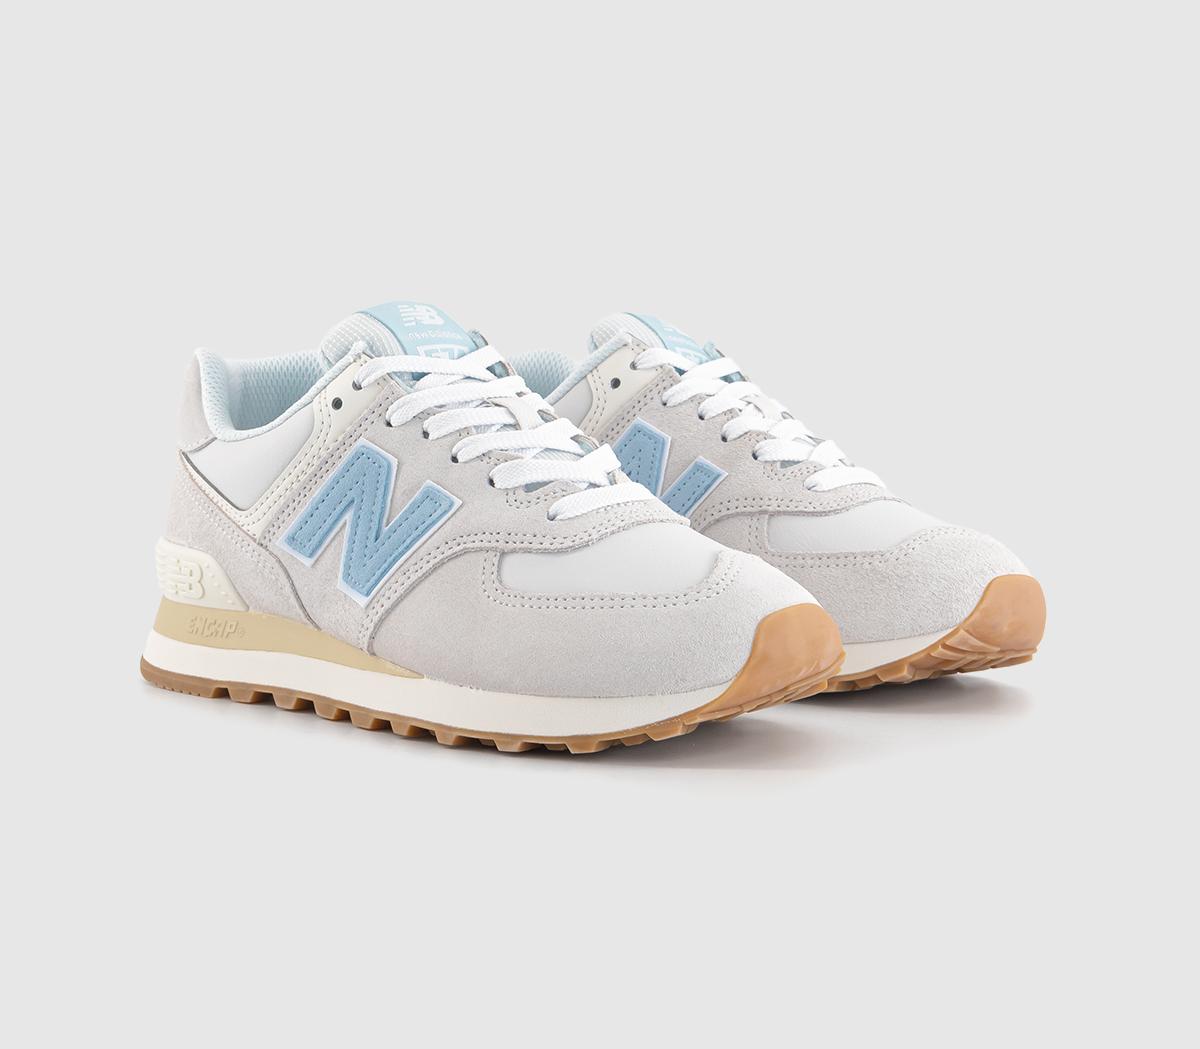 New Balance Mens 574 Trainers Reflection Natural, 8